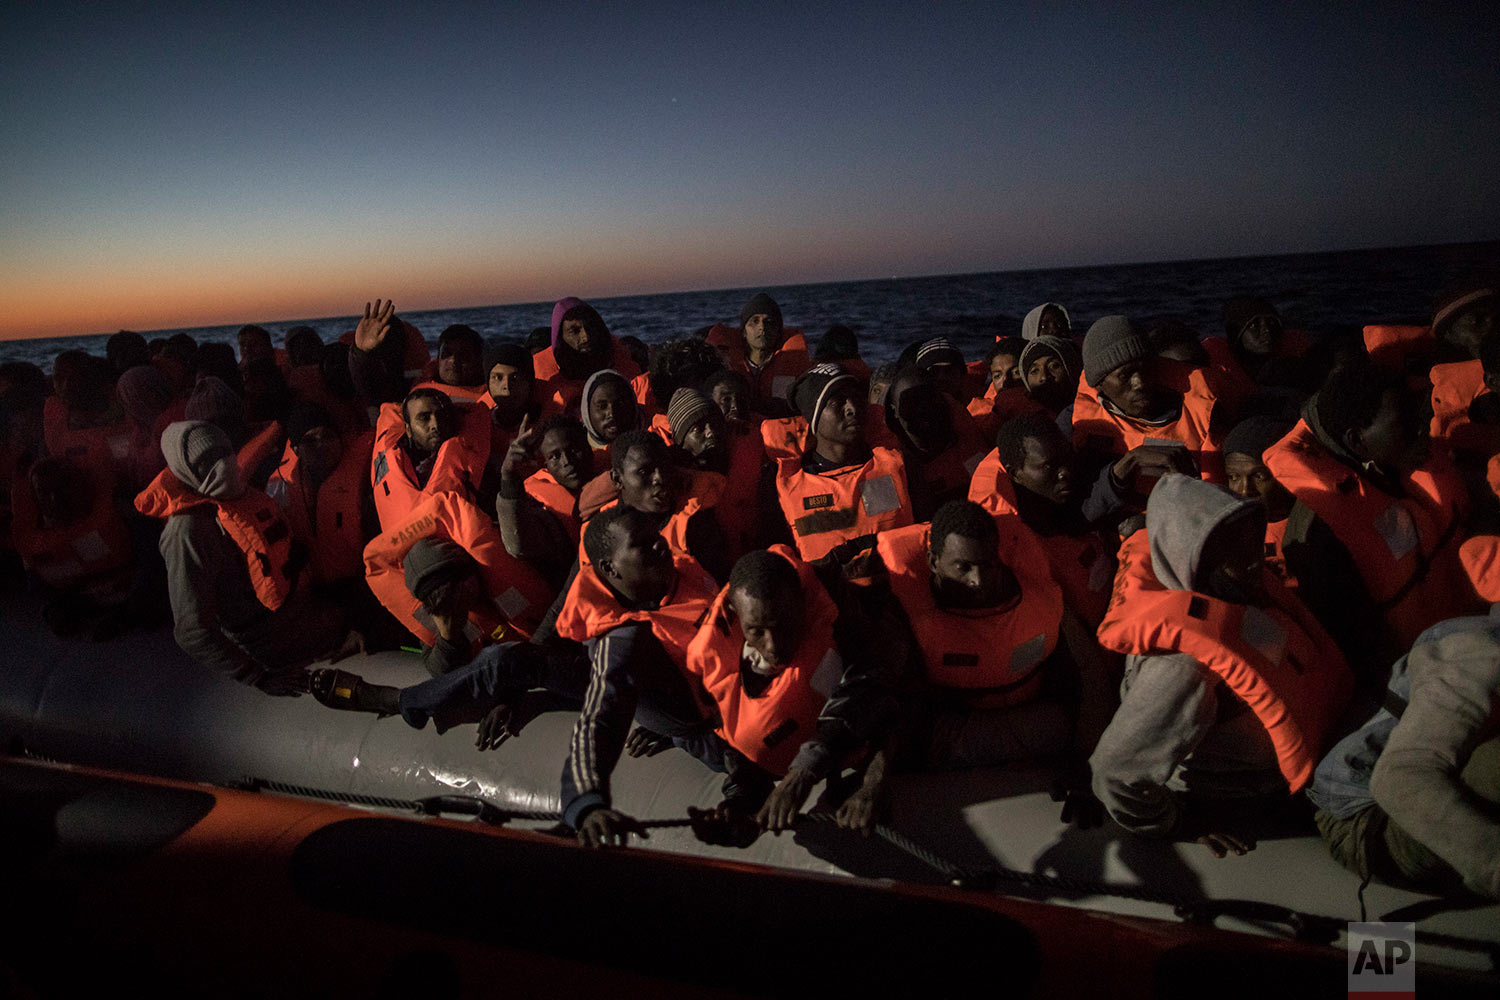  In this Tuesday, Jan. 16, 2018, photo, Sub-Saharan refugees and migrants from different nationalities trying to leave the Libyan coast and reach European soil aboard an overcrowded rubber boat are rescued by a team of aid workers from the Spanish NGO Proactiva Open Arms, 28 miles north of Al Khums, Libya. (AP Photo/Santi Palacios)&nbsp; |&nbsp; See these photos on AP Images  